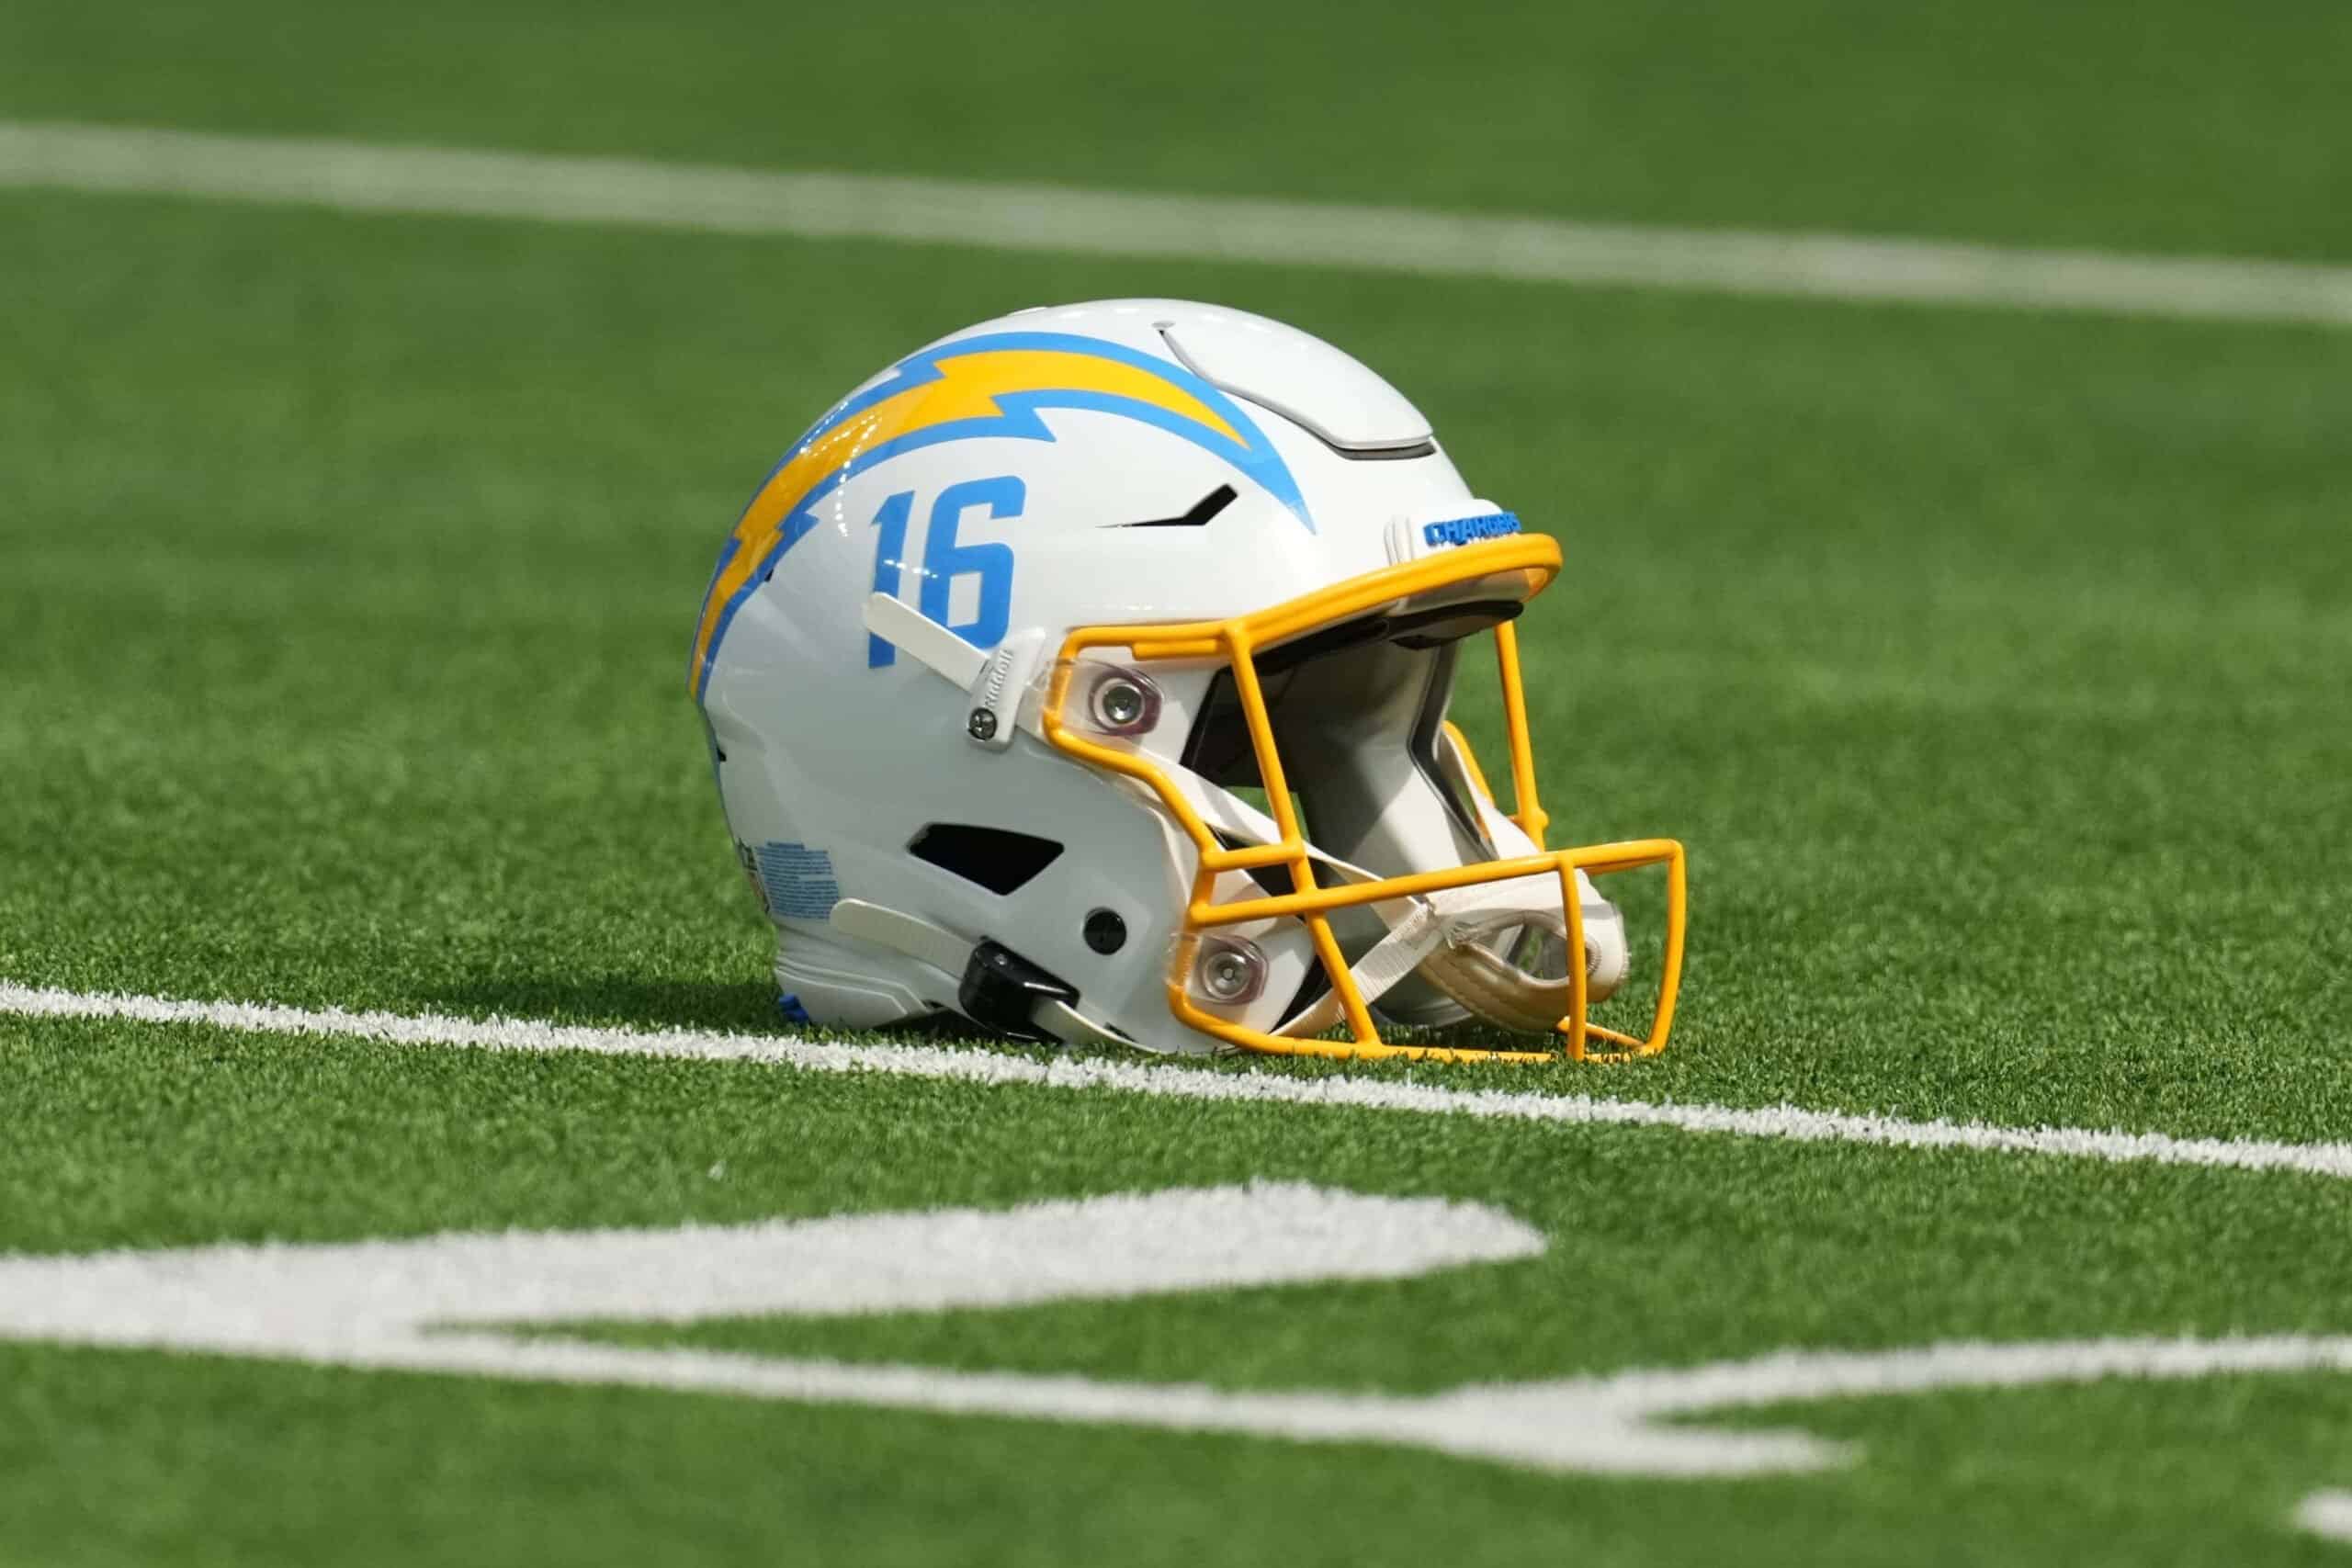 chargers nfl mock draft 2022